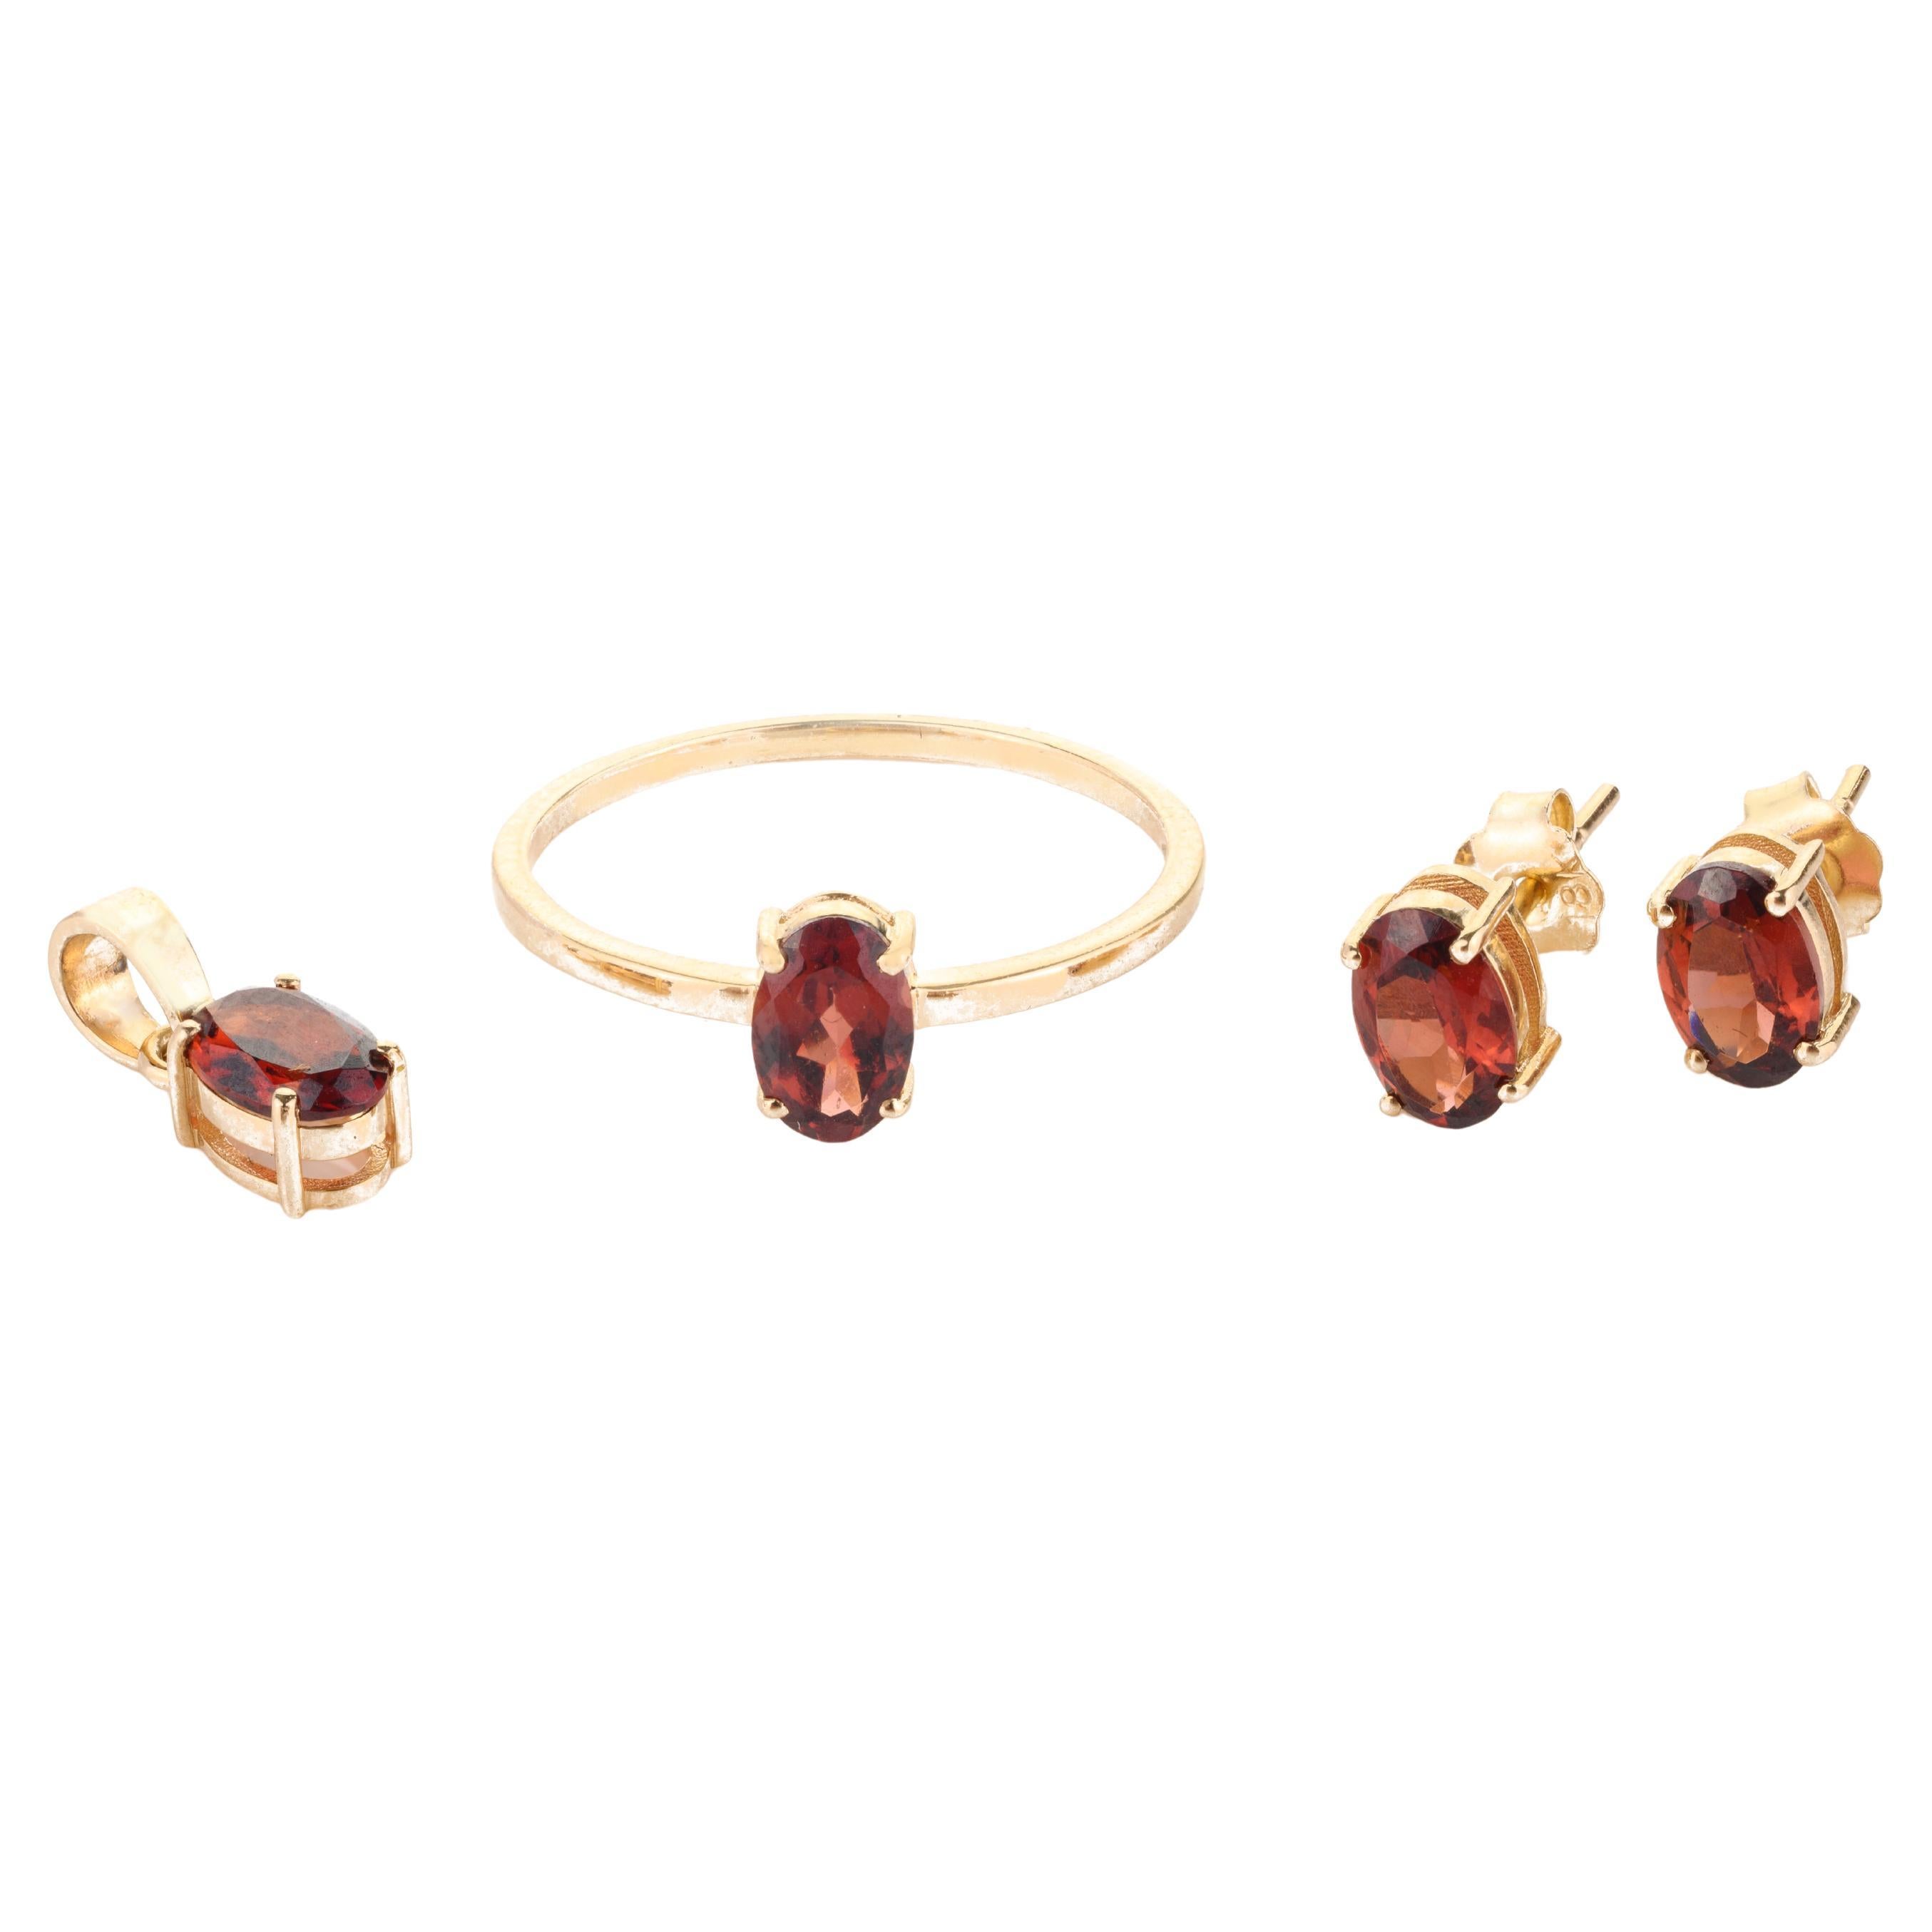 For Sale:  18k Solid Yellow Gold Handmade Garnet Ring, Earrings and Pendant Jewelry Set